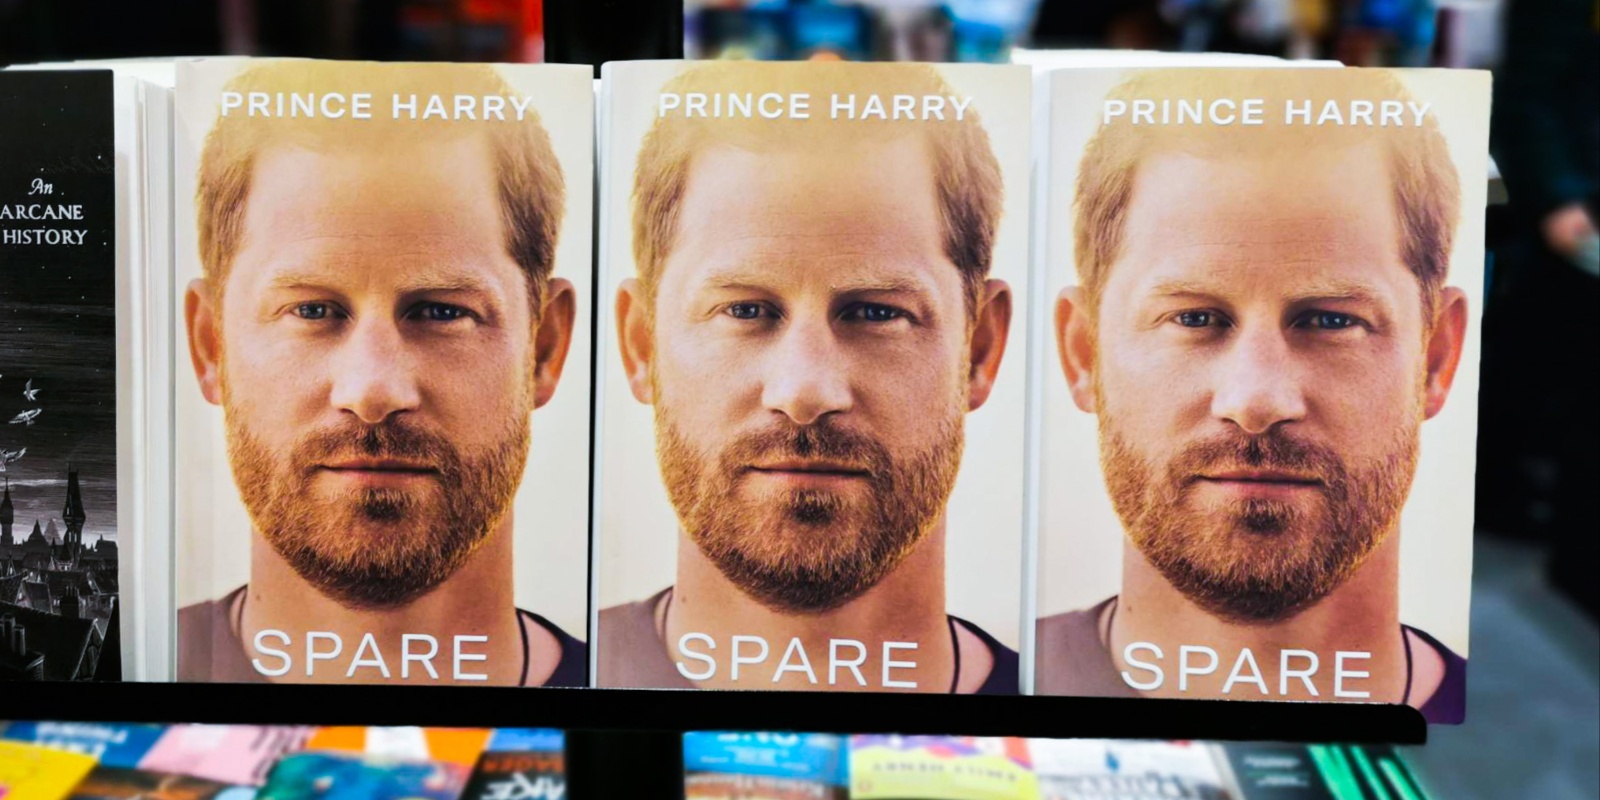 Three copies of Prince Harry's book 'Spare' on display at a bookstore.